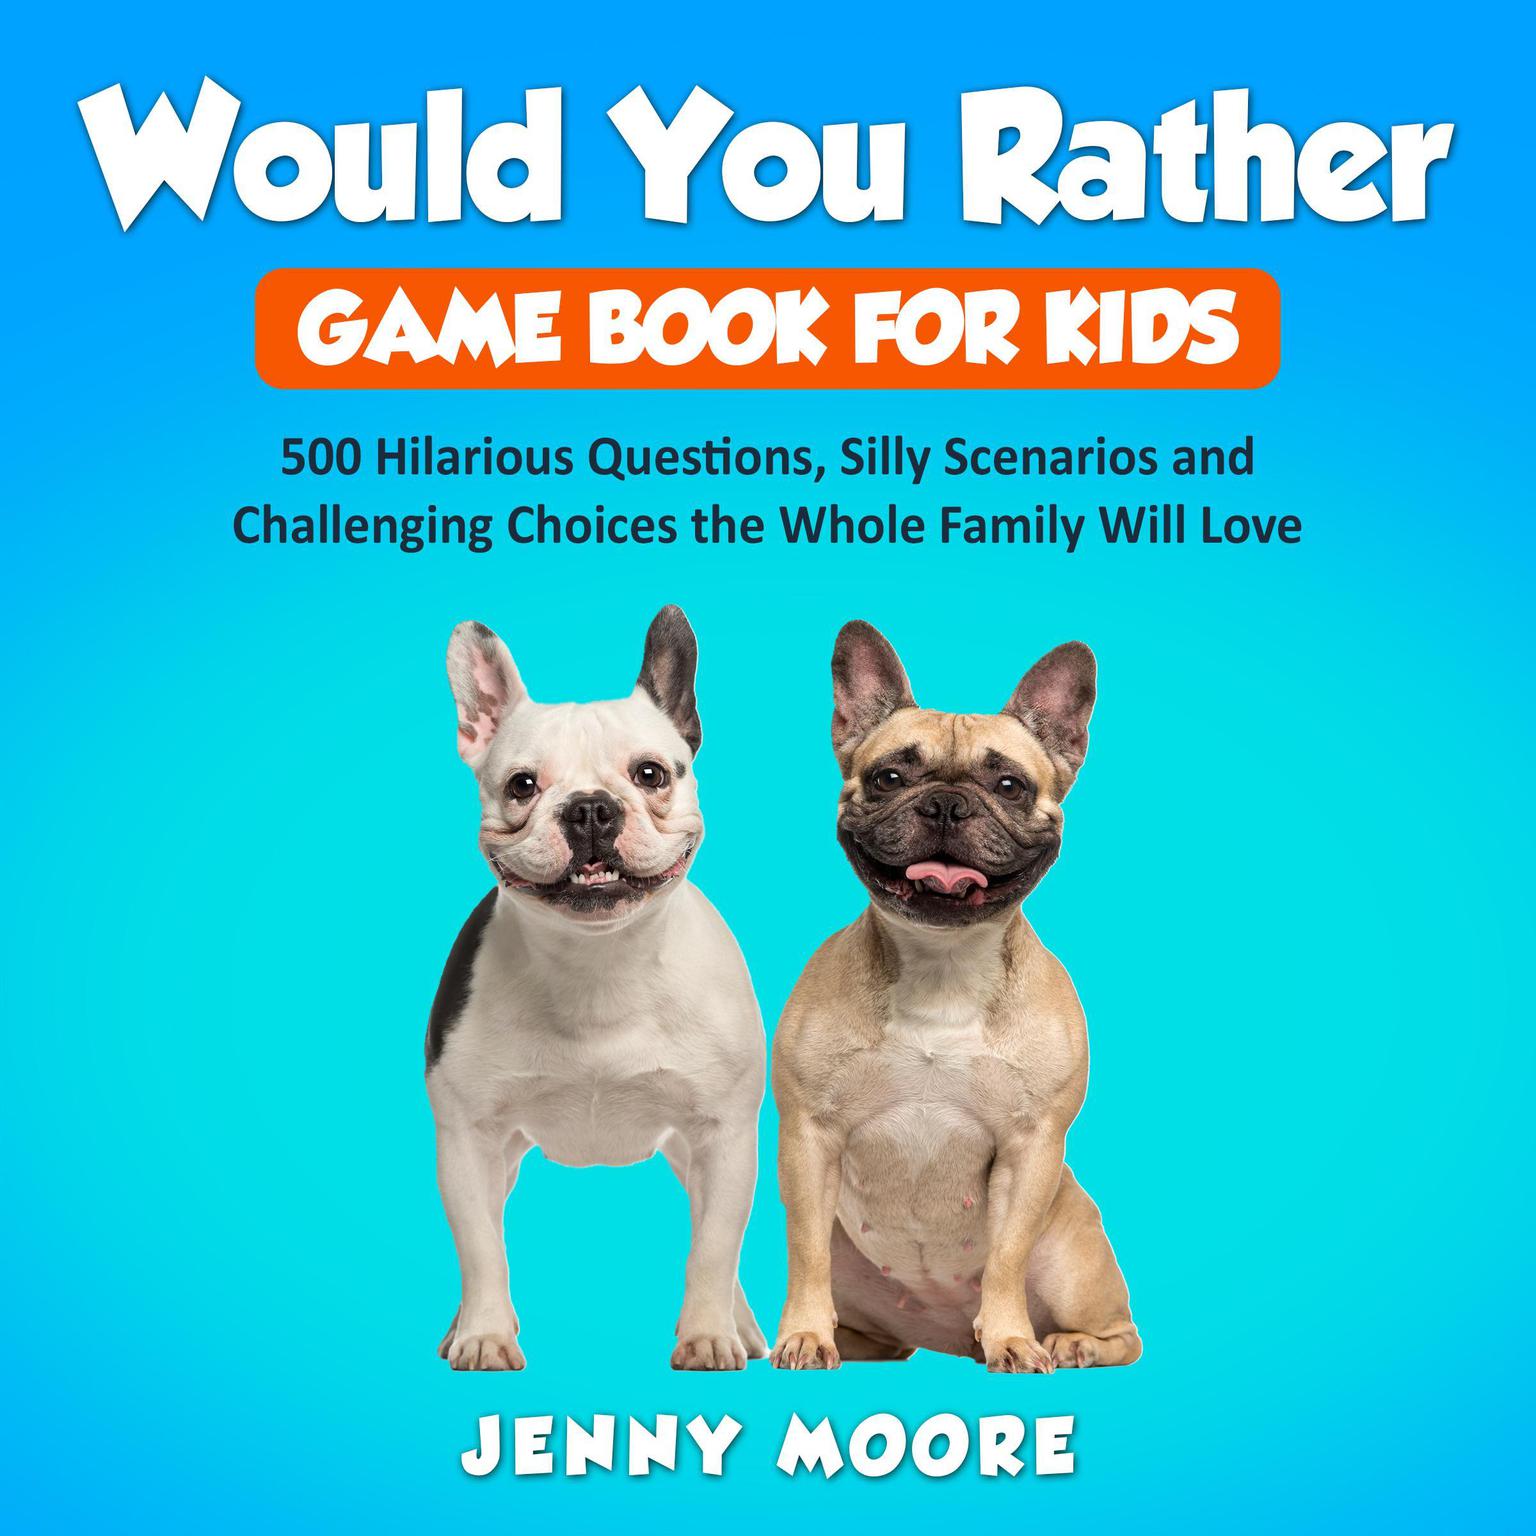 Would You Rather Game Book for Kids: 500 Hilarious Questions, Silly Scenarios and Challenging Choices the Whole Family Will Love Audiobook, by Jenny Moore